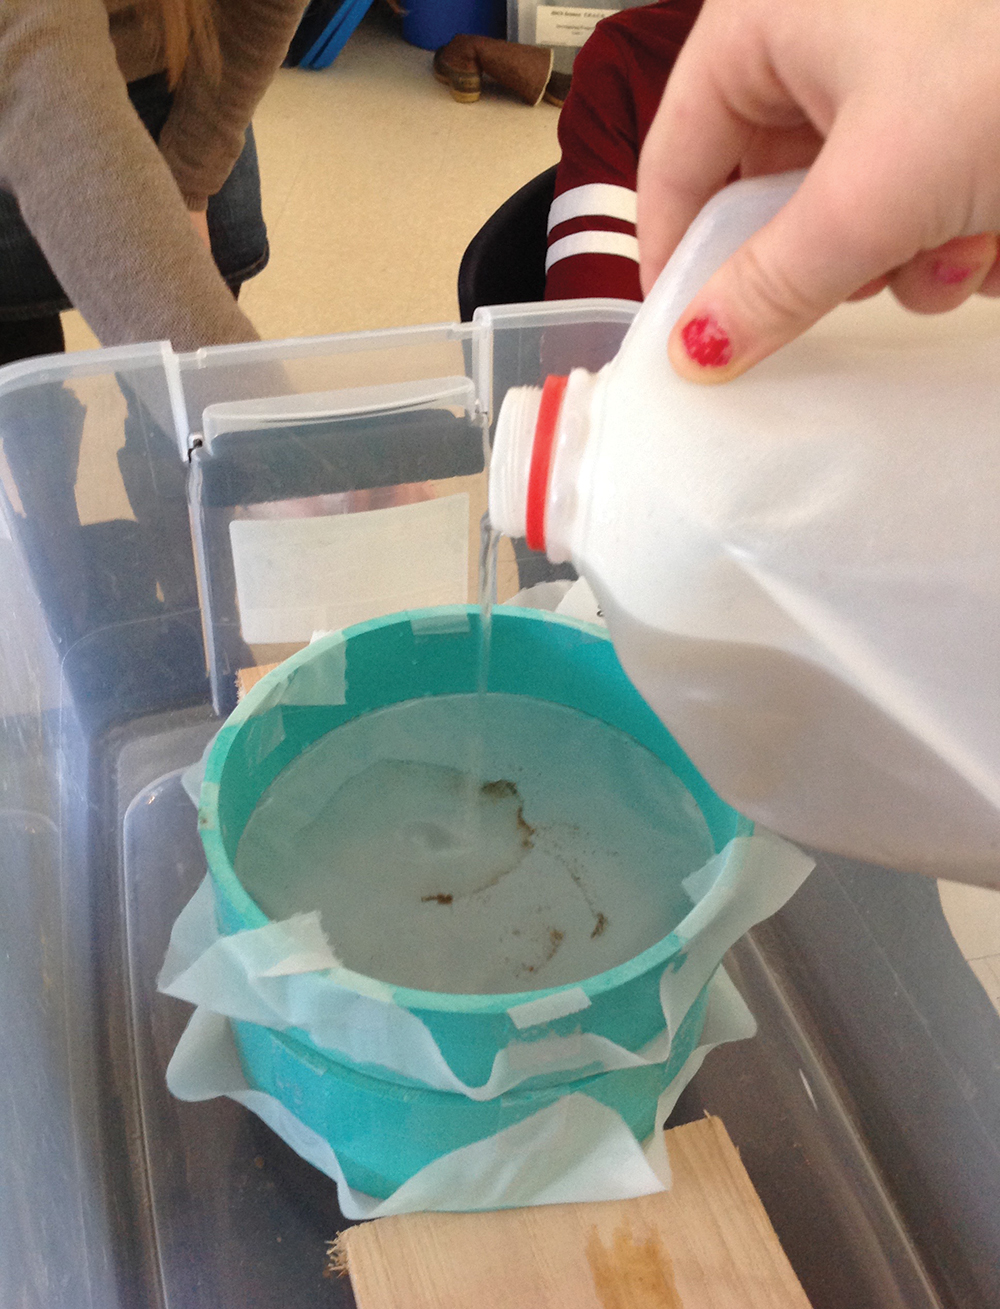 Students filter the water samples through sieves